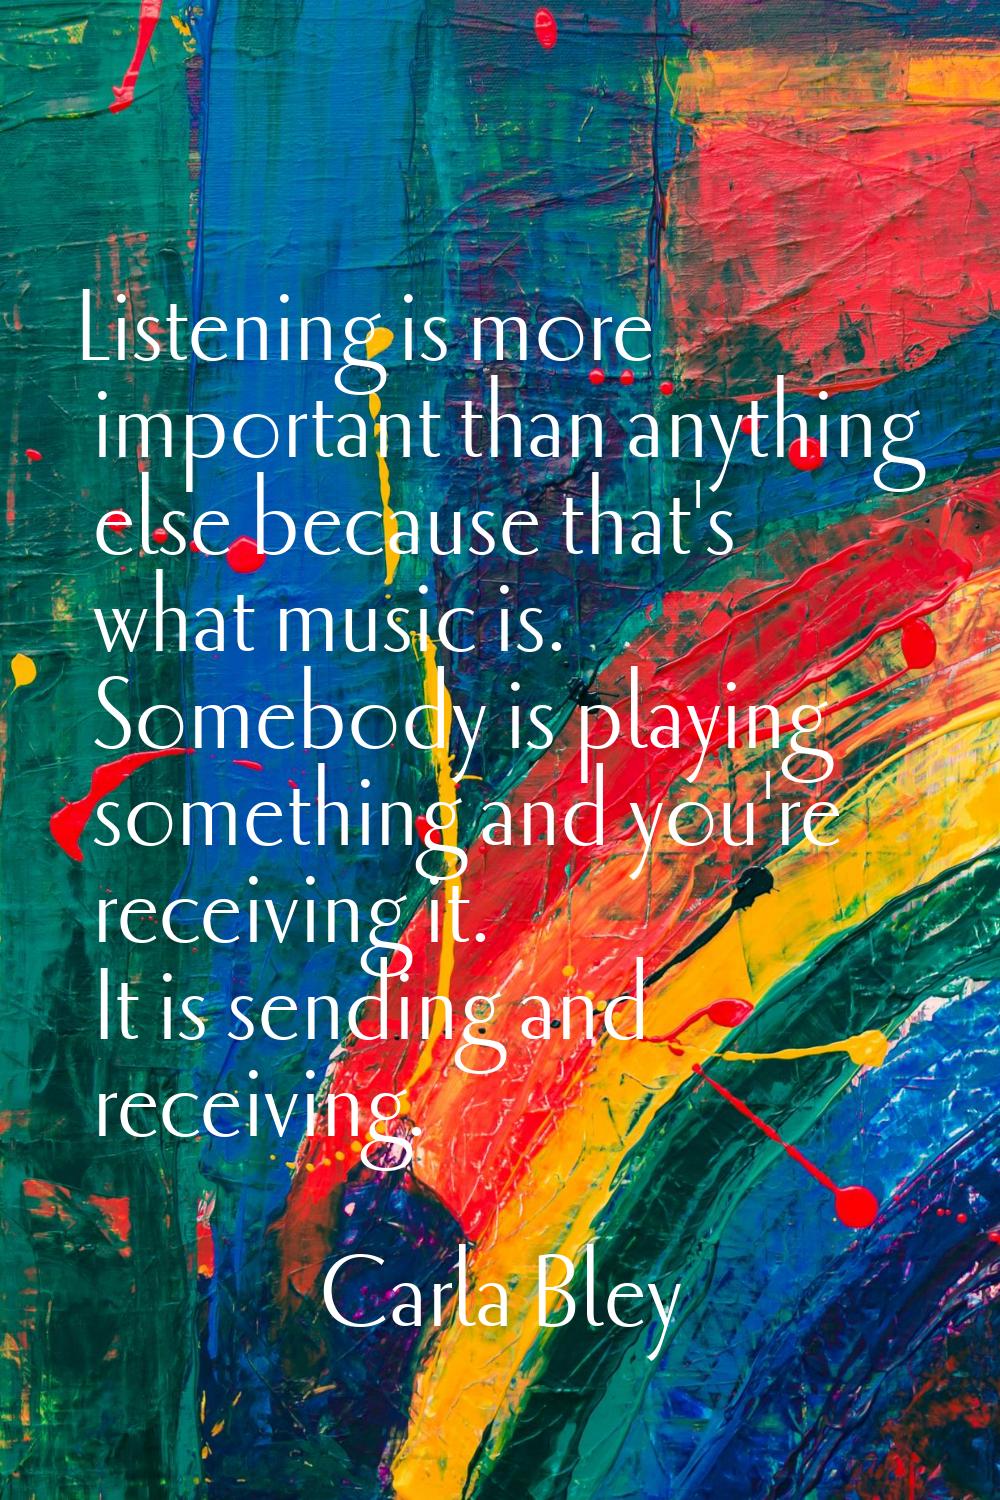 Listening is more important than anything else because that's what music is. Somebody is playing so